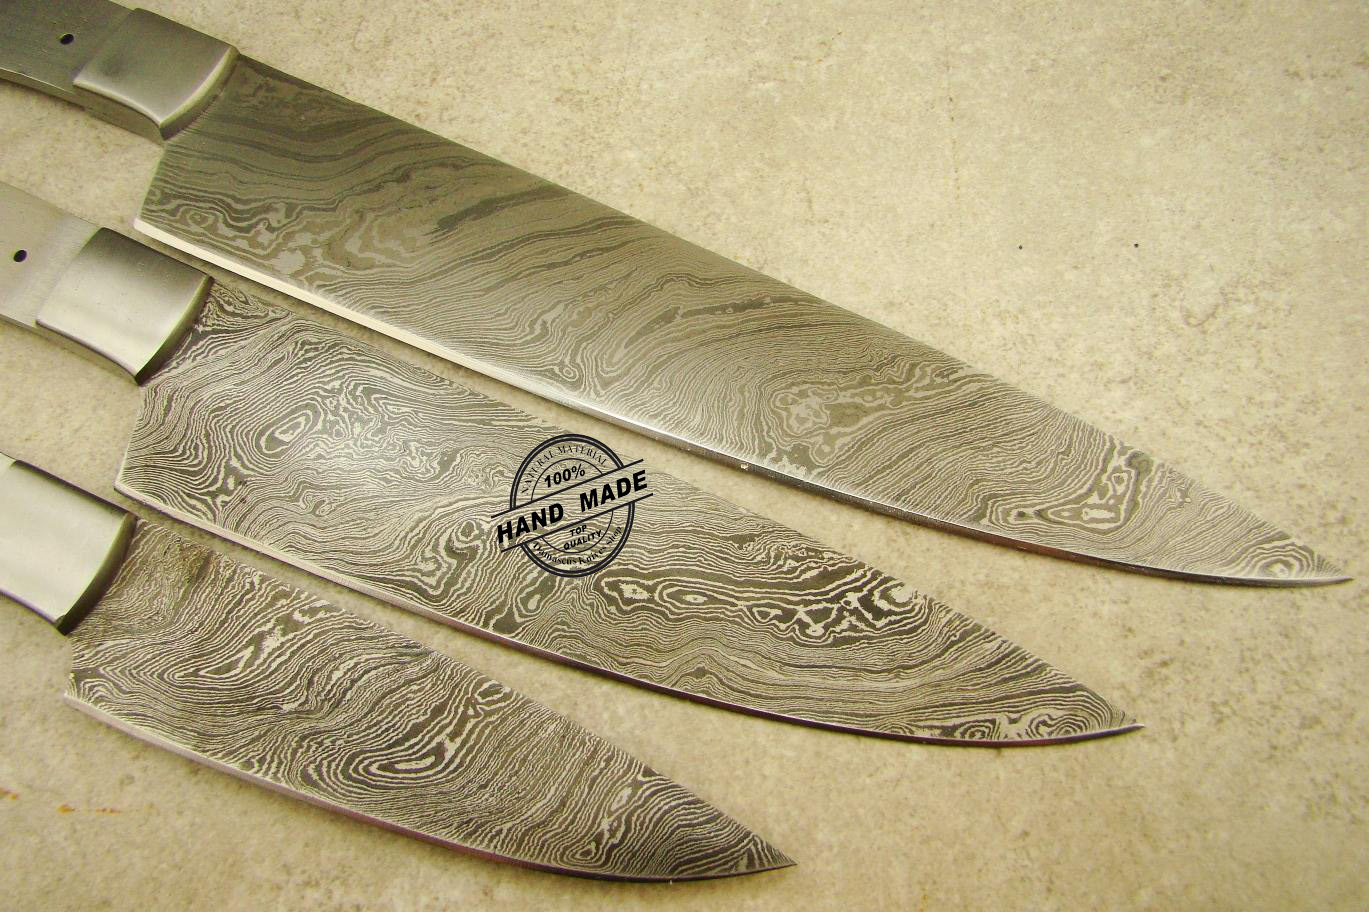 Details about   LOT OF 10 CUSTOM HANDMADE DAMASCUS STEEL BLANK BLADE SHEFF  KNIVES 